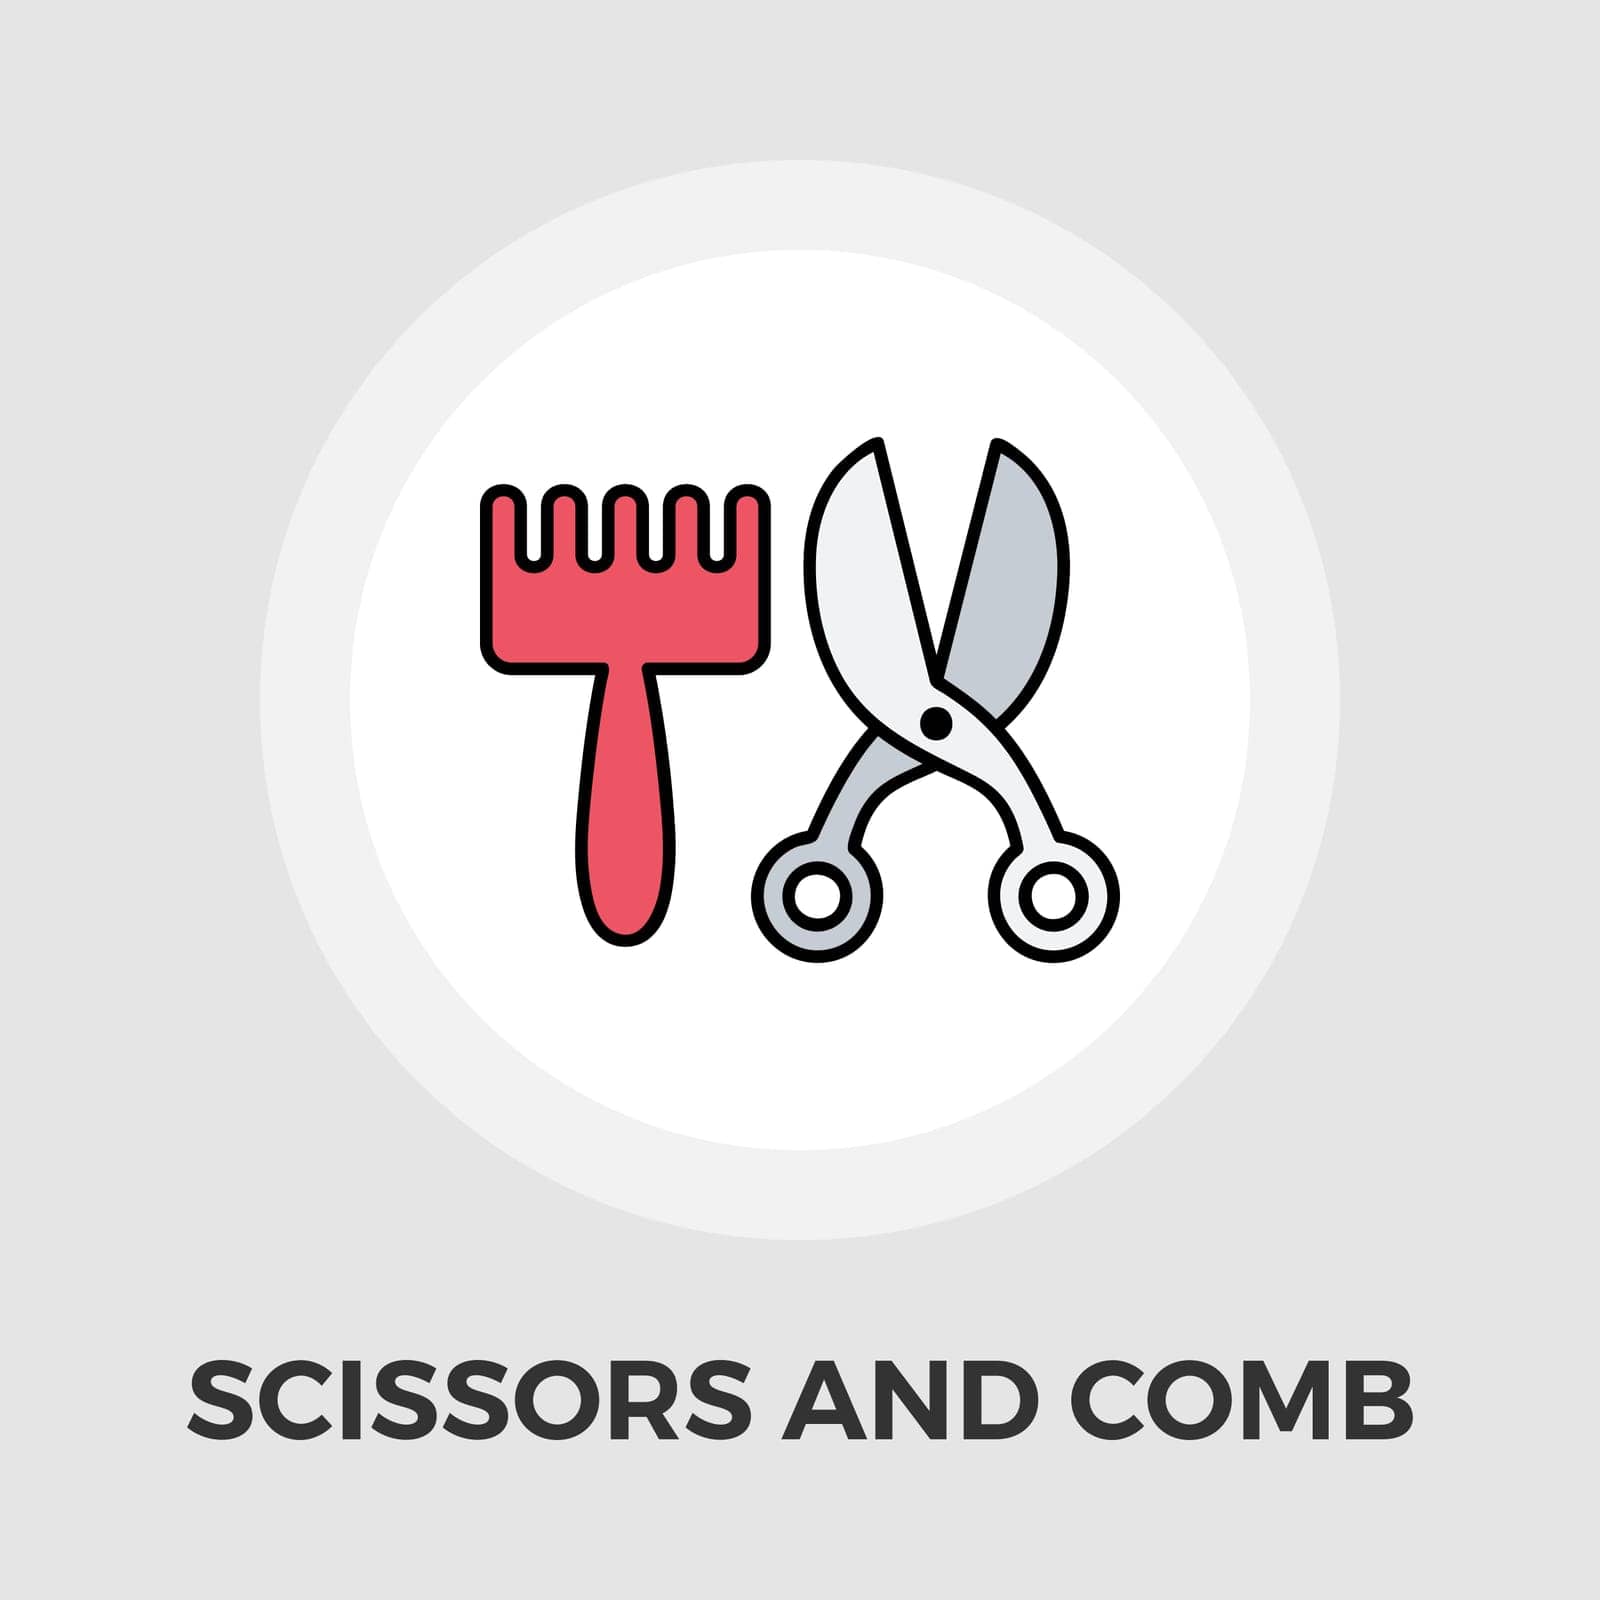 Scissors and comb icon vector. Flat icon isolated on the white background. Editable EPS file. Vector illustration.